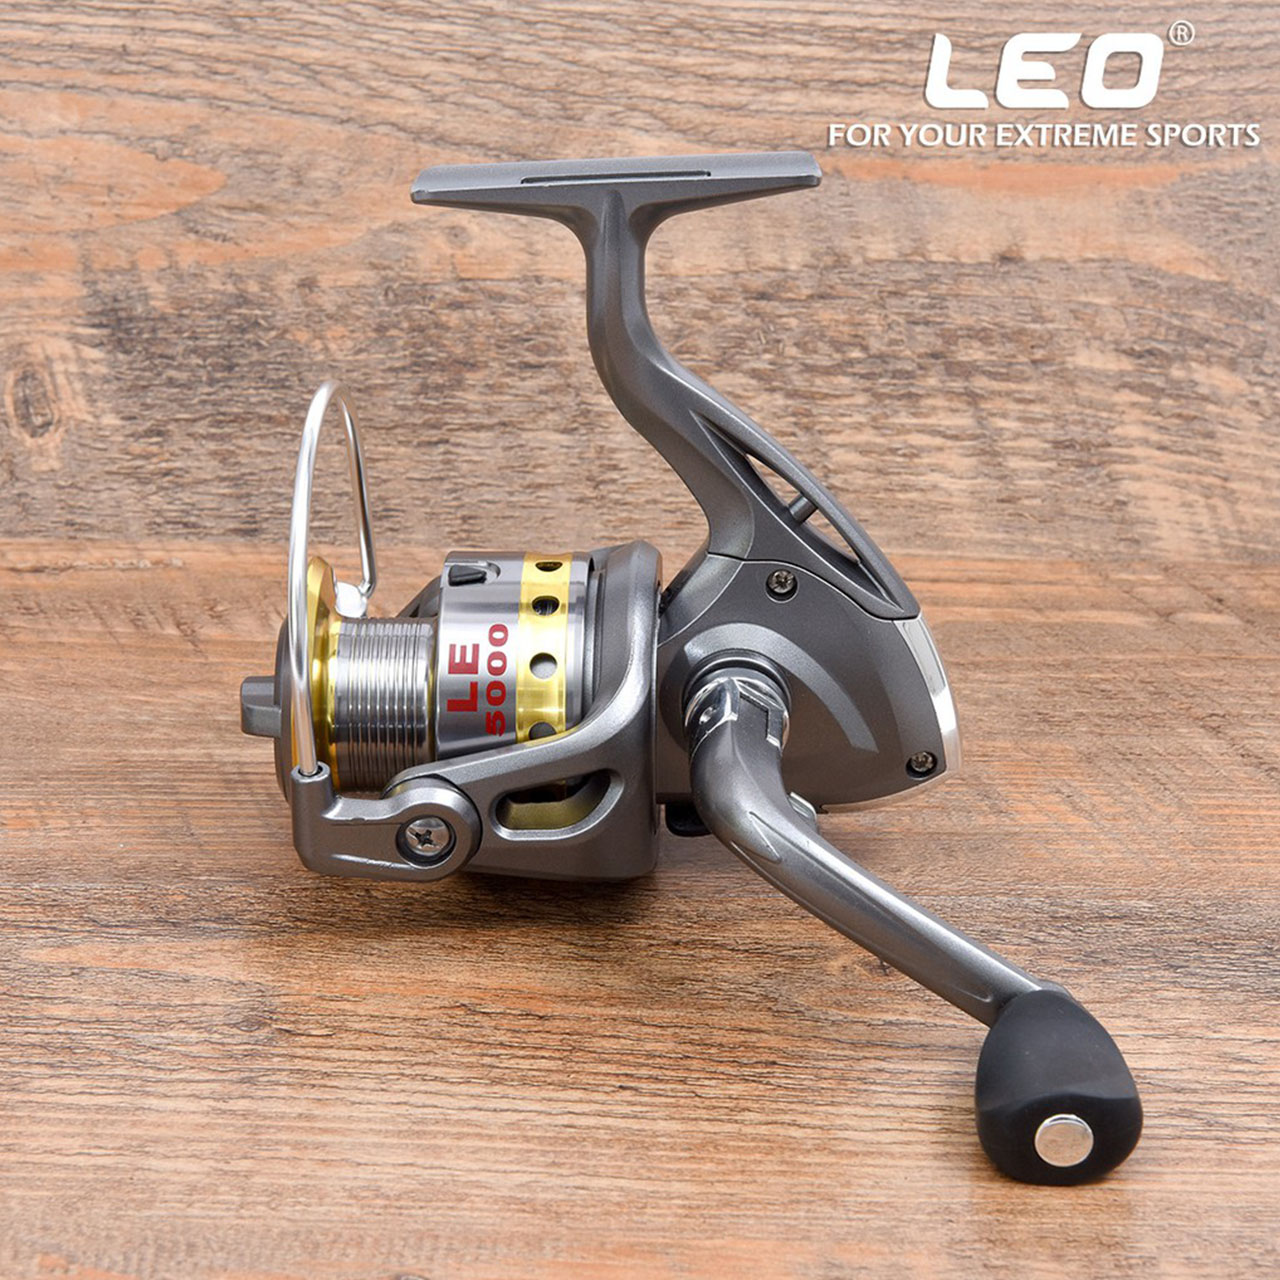 LEO 2.1m/2.4m Fishing Rod and Reel Set with Carrier Bag